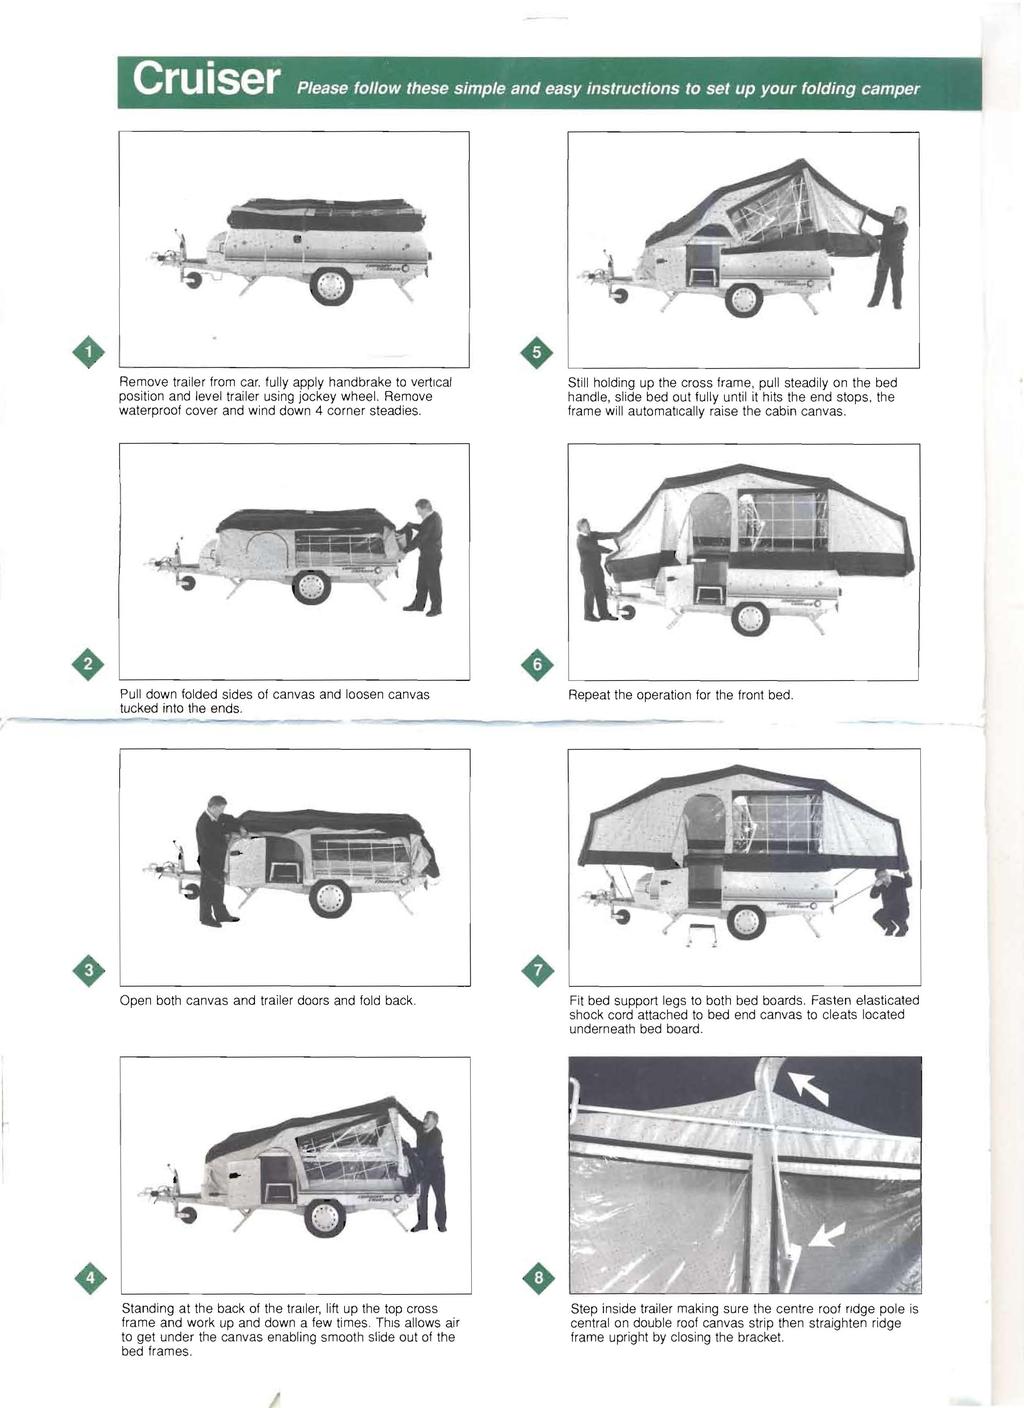 Cruiser Please follow these simple and easy instructions to set up your folding camper :.I. I ~ -. Remove trailer from car.